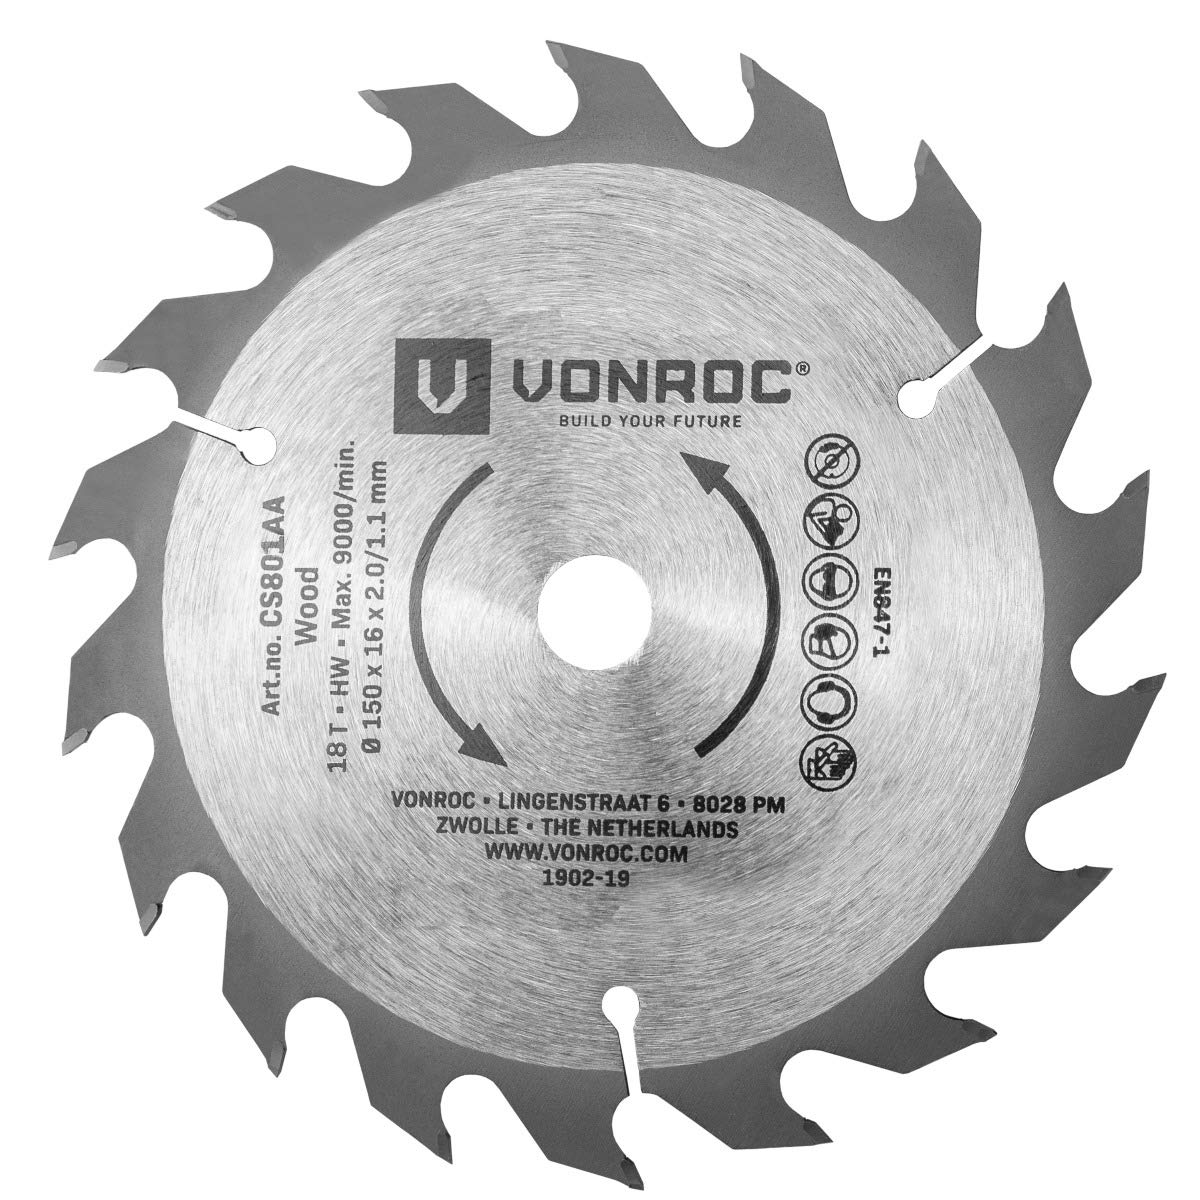 VONROC Circular Saw Blade 150 X 16mm - 18T - Suitable For Wood - Universal